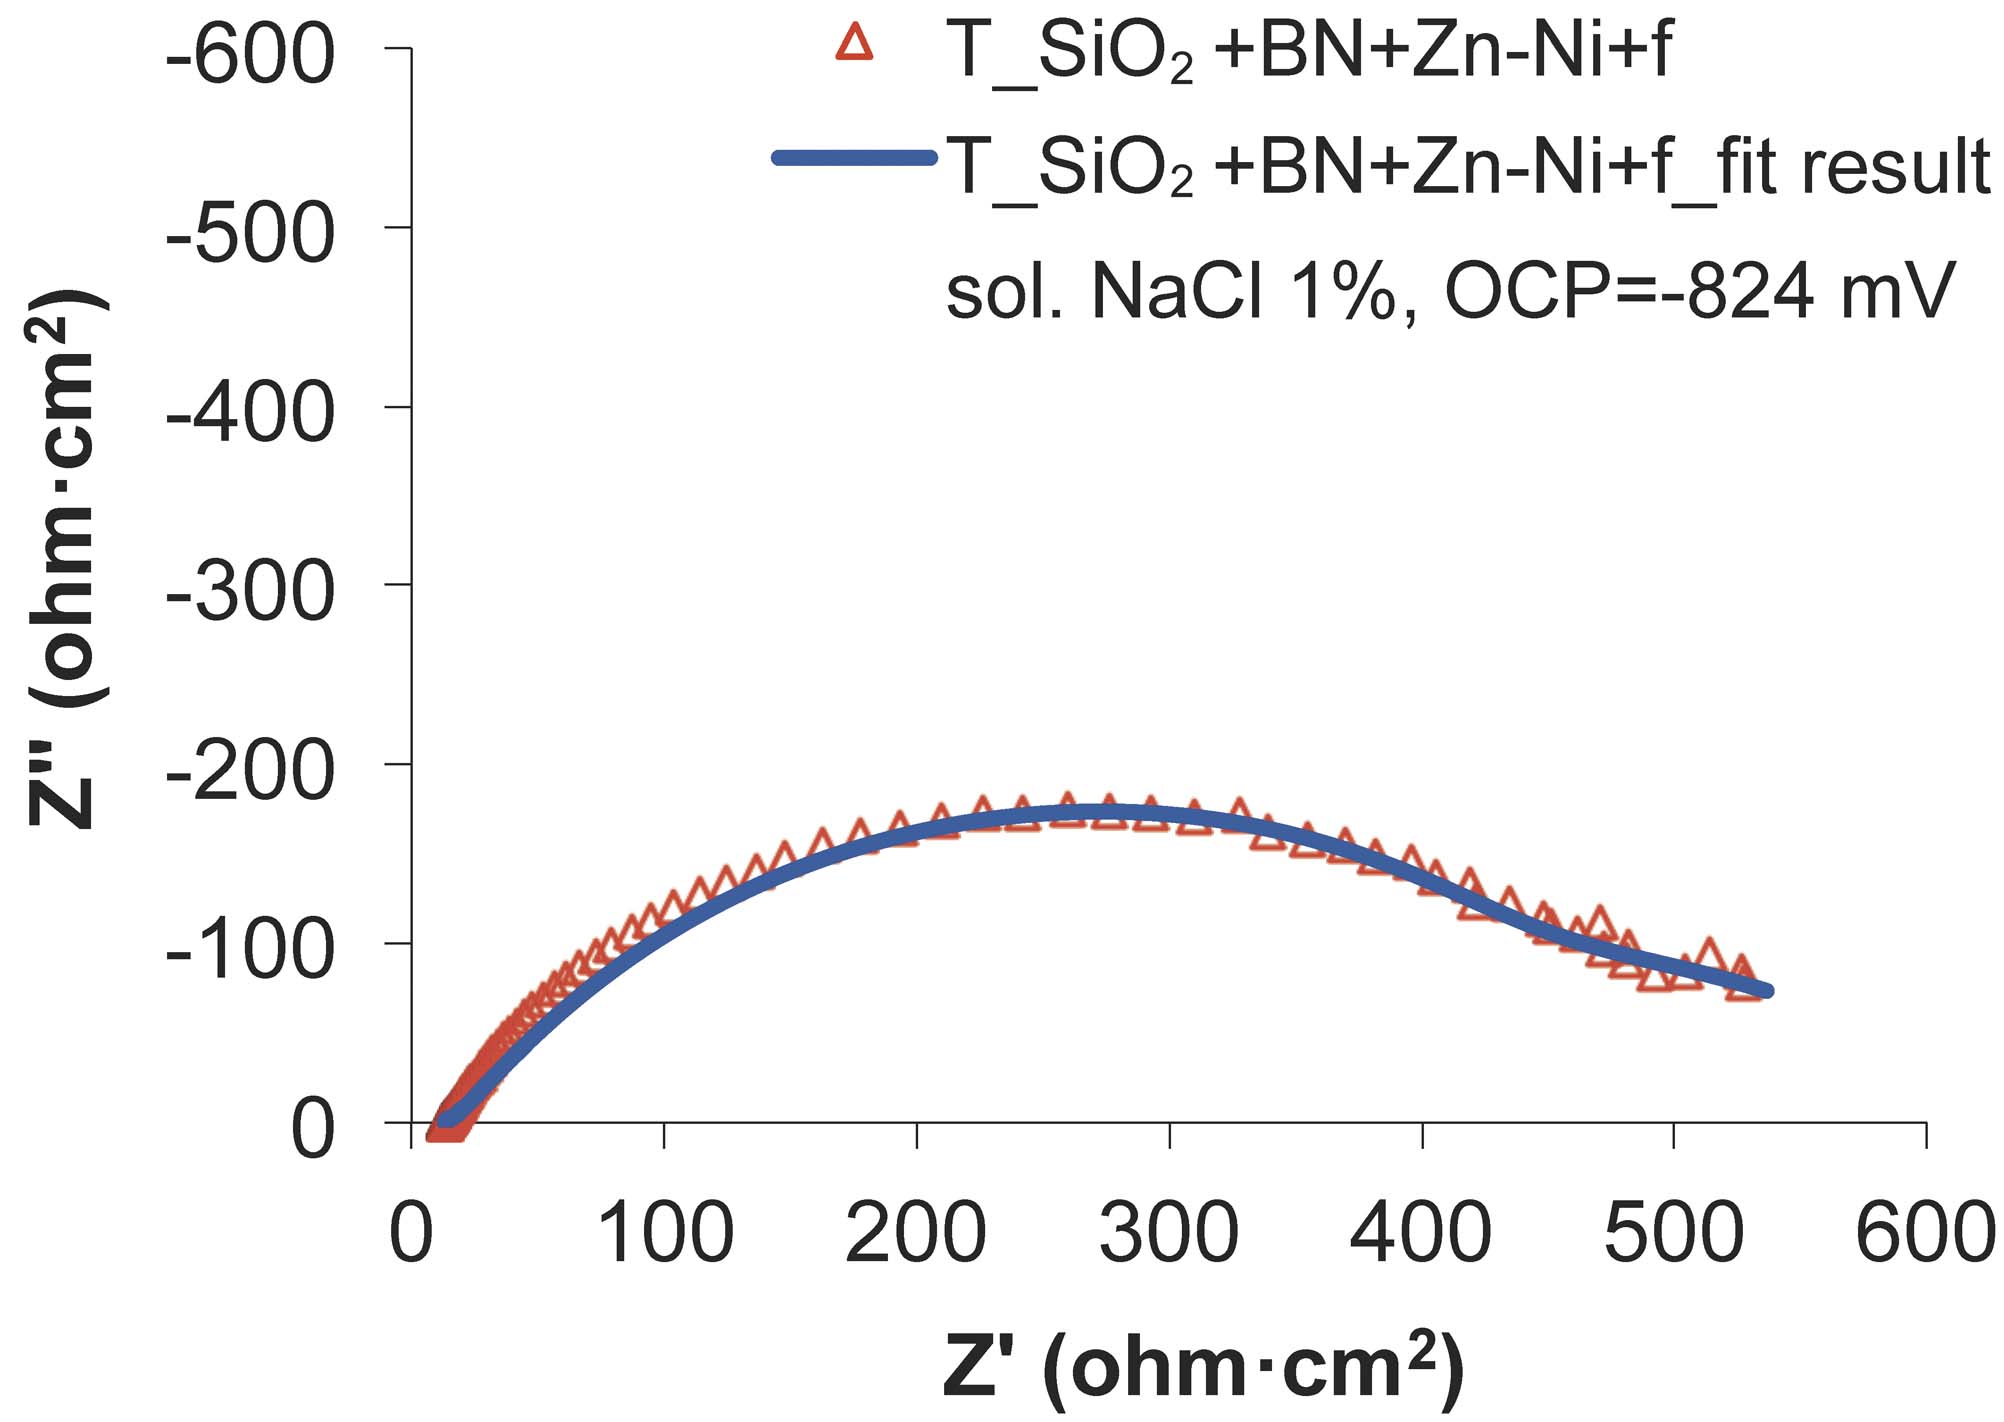 Fig. 16: The experimental and fitted Nyquist diagrams for SiO2+BN+Zn-Ni+f sample, after the wear test